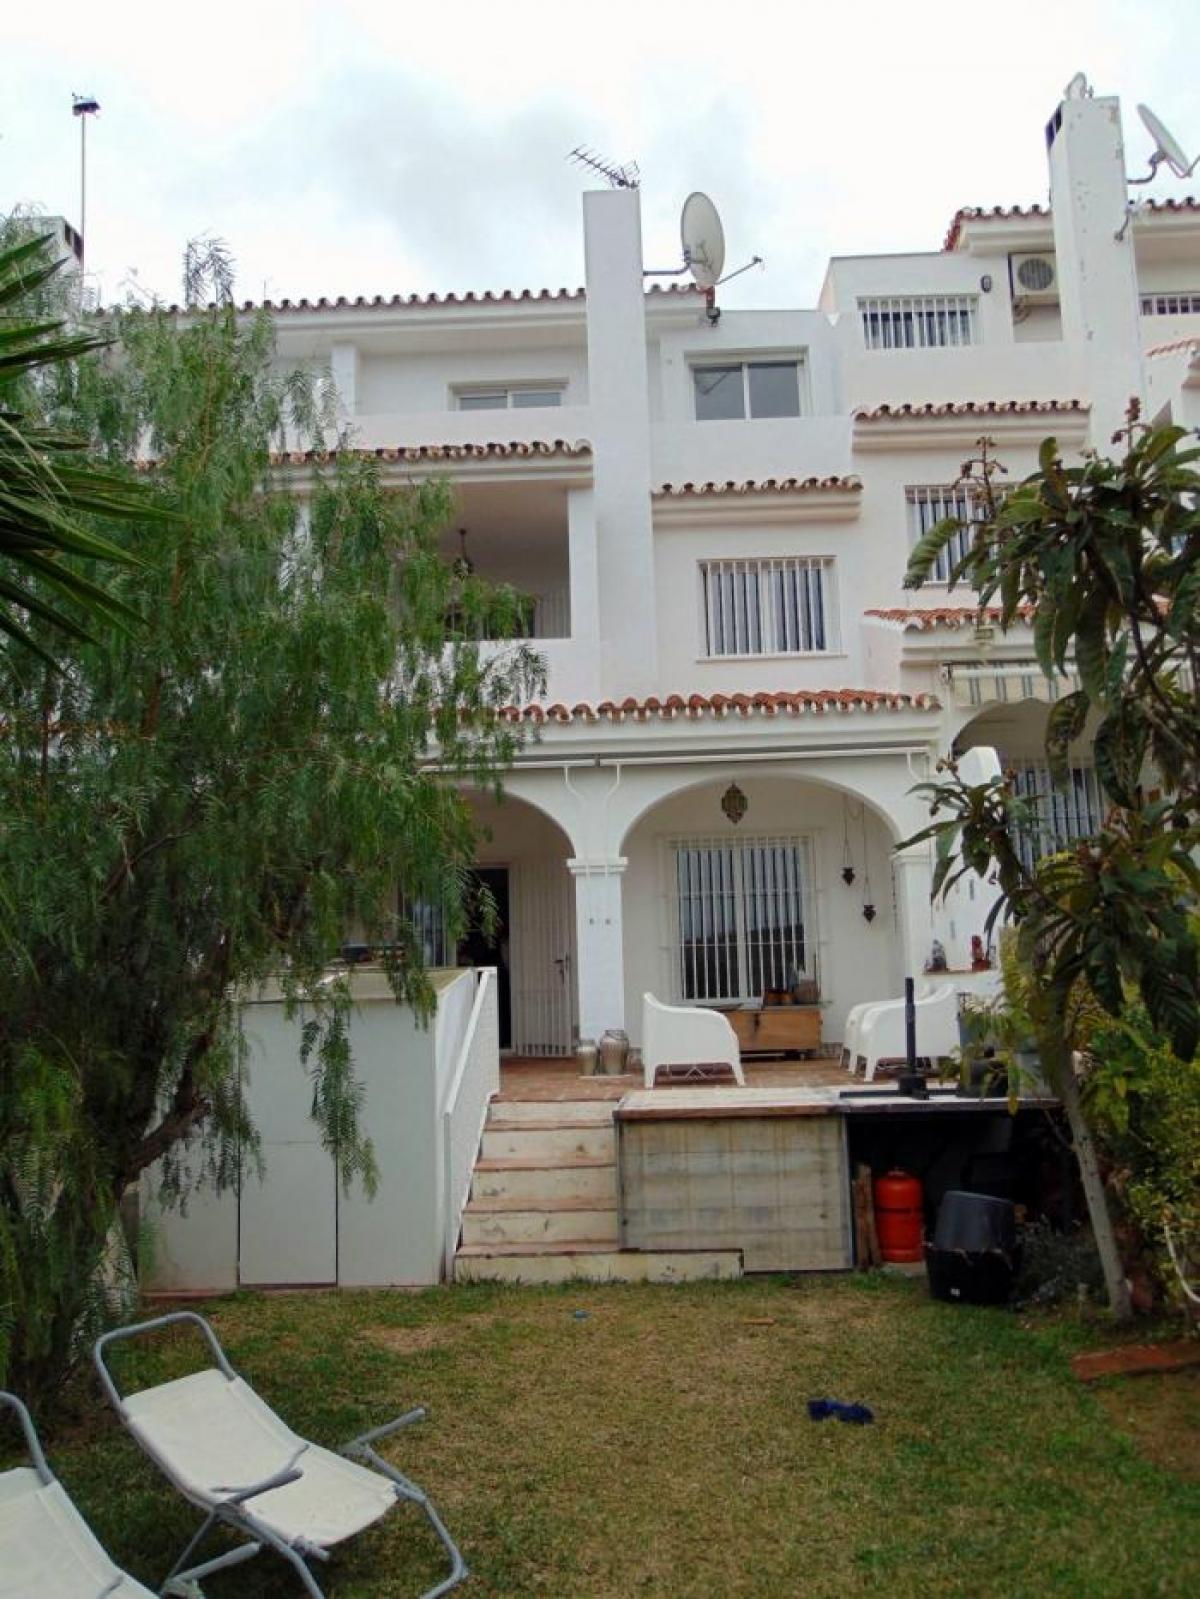 Picture of Apartment For Sale in Lauro Golf, Malaga, Spain